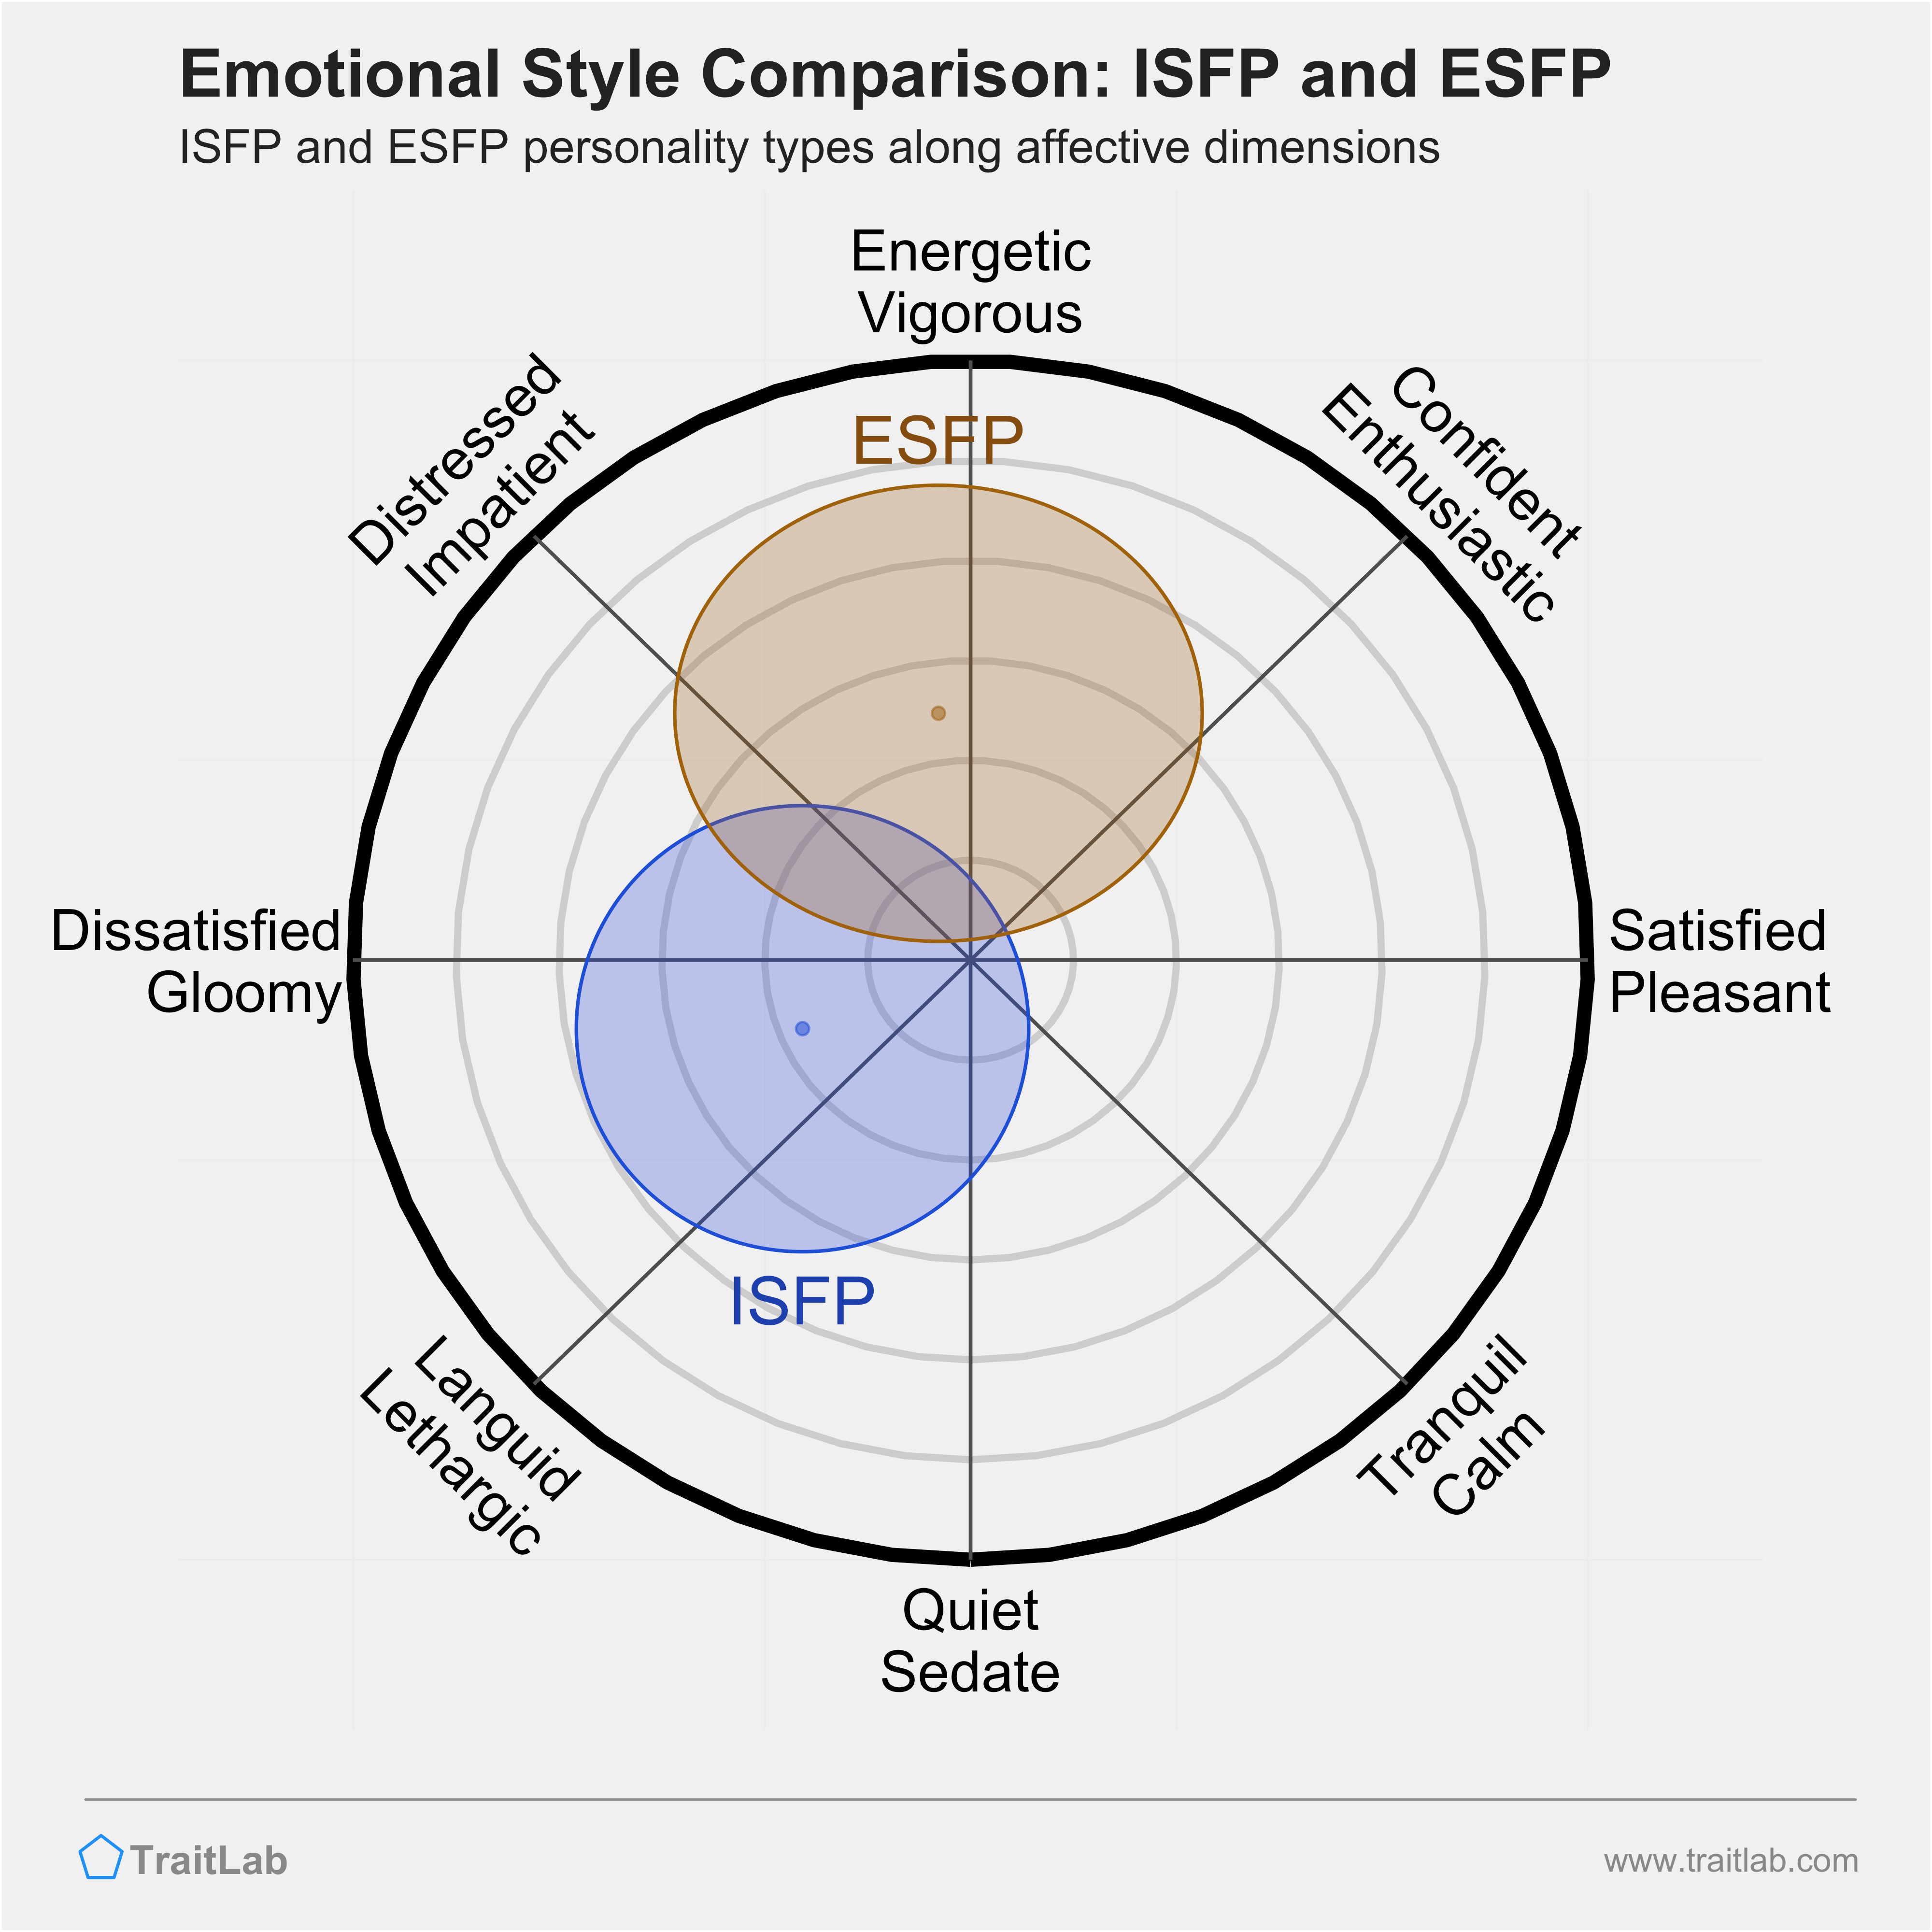 ISFP and ESFP comparison across emotional (affective) dimensions